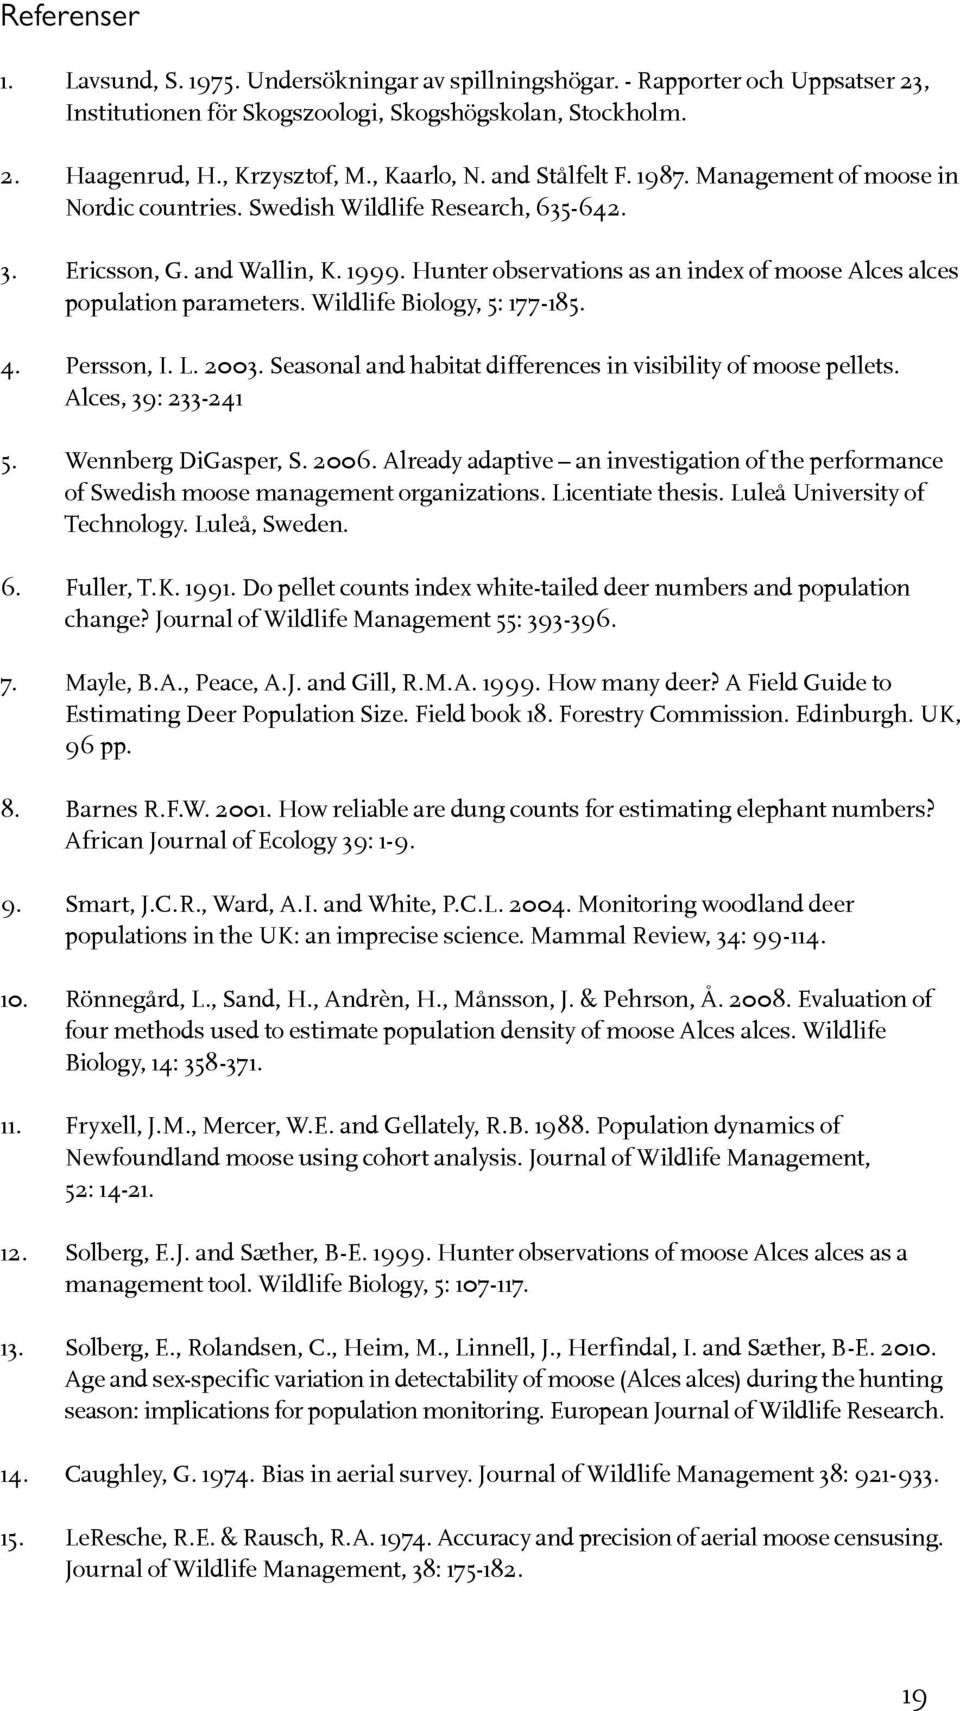 Hunter observations as an index of moose Alces alces population parameters. Wildlife Biology, 5: 177-185. 4. Persson, I. L. 2003. Seasonal and habitat differences in visibility of moose pellets.